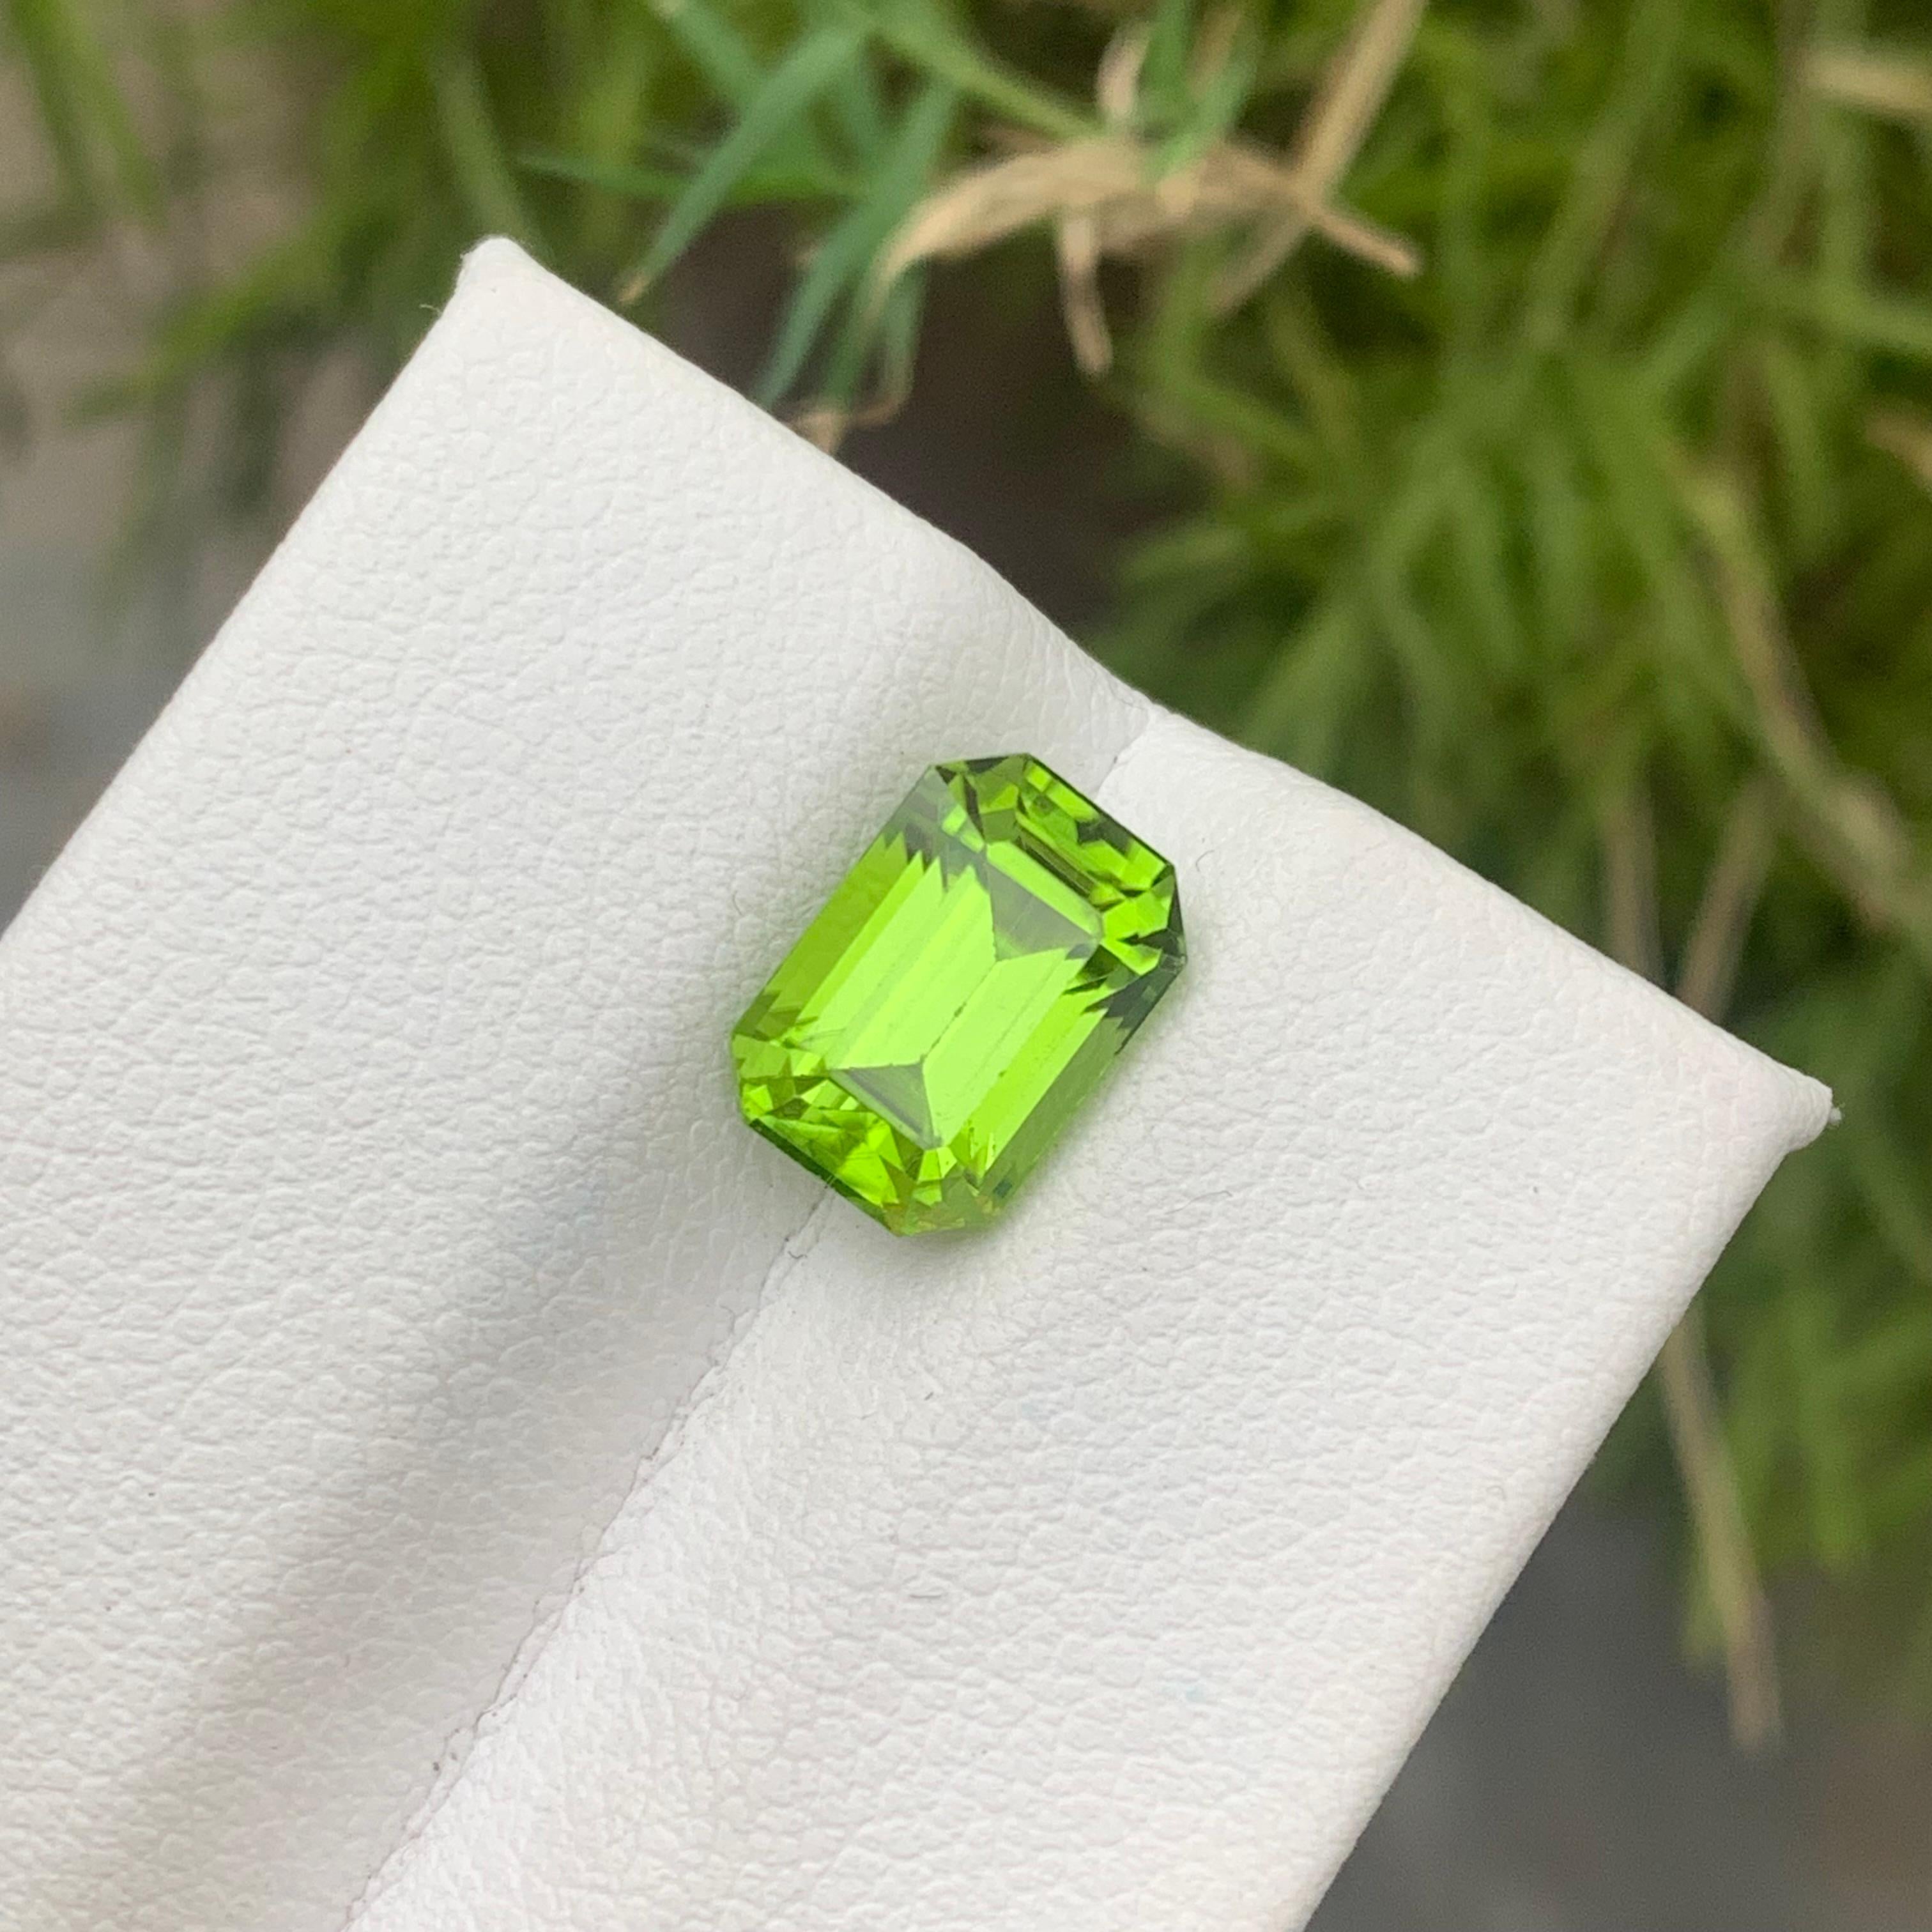 Gorgeous 3.35 Carat Natural Loose Green Peridot Gemstone from Pakistani Mine For Sale 7